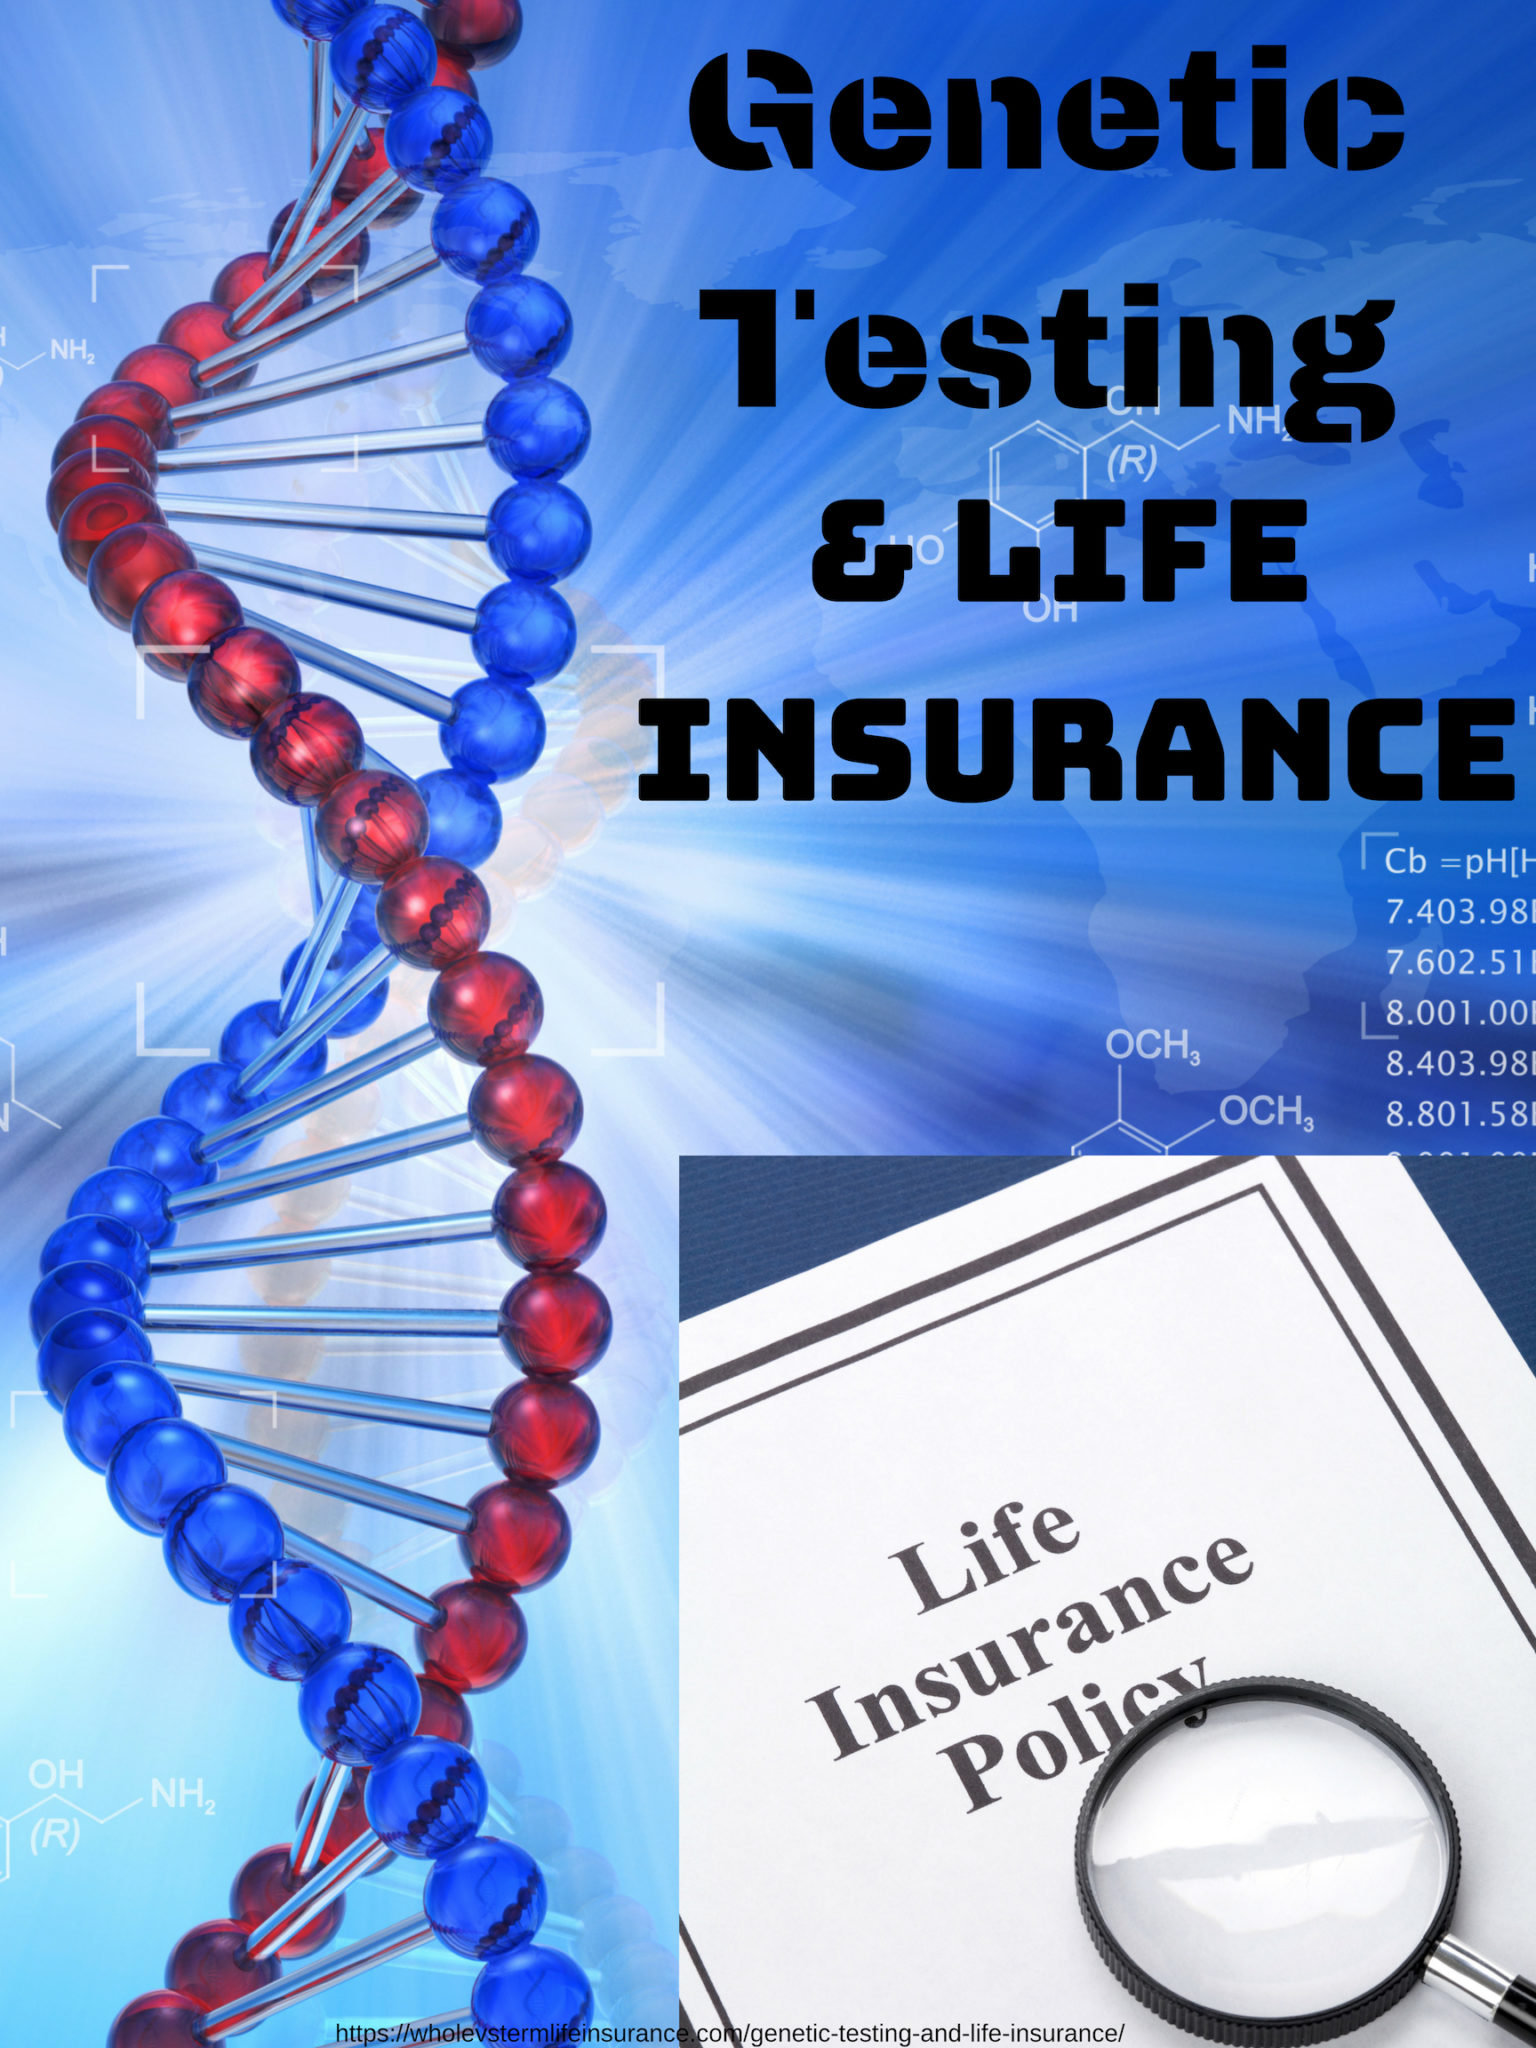 Genetic Testing with Life insurance applications, the ethics, laws, and future